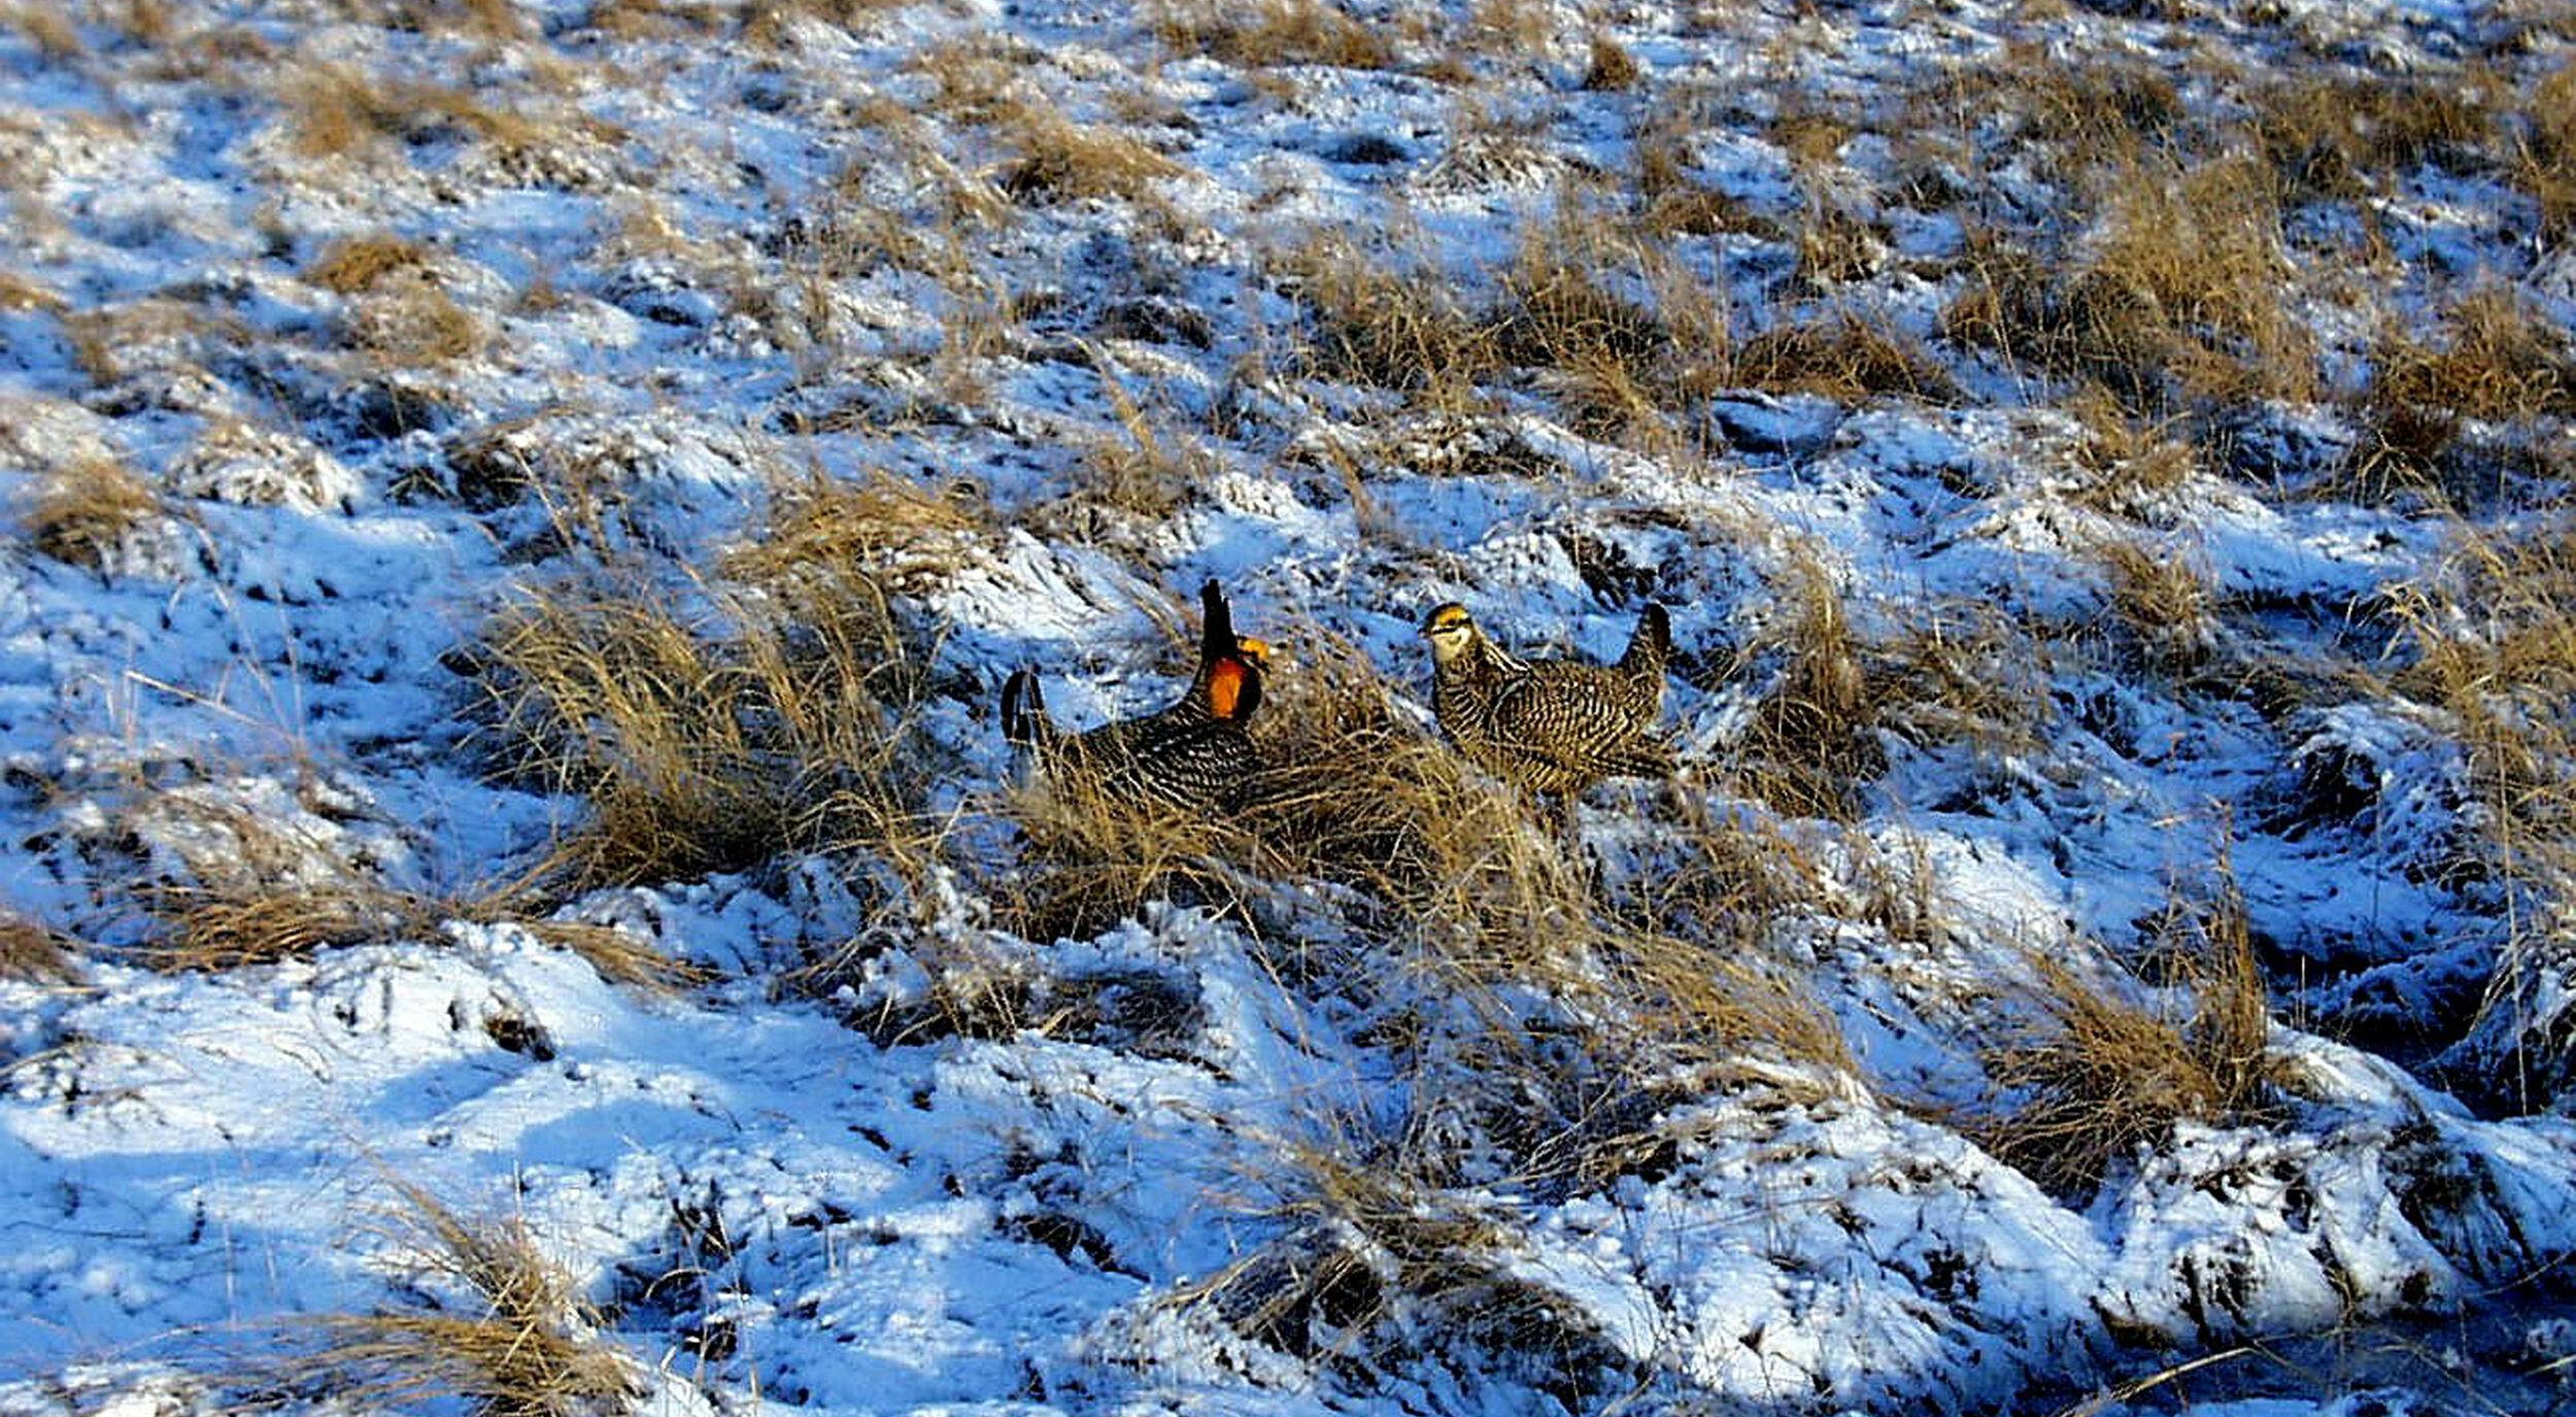 Prairie chickens in the snow.